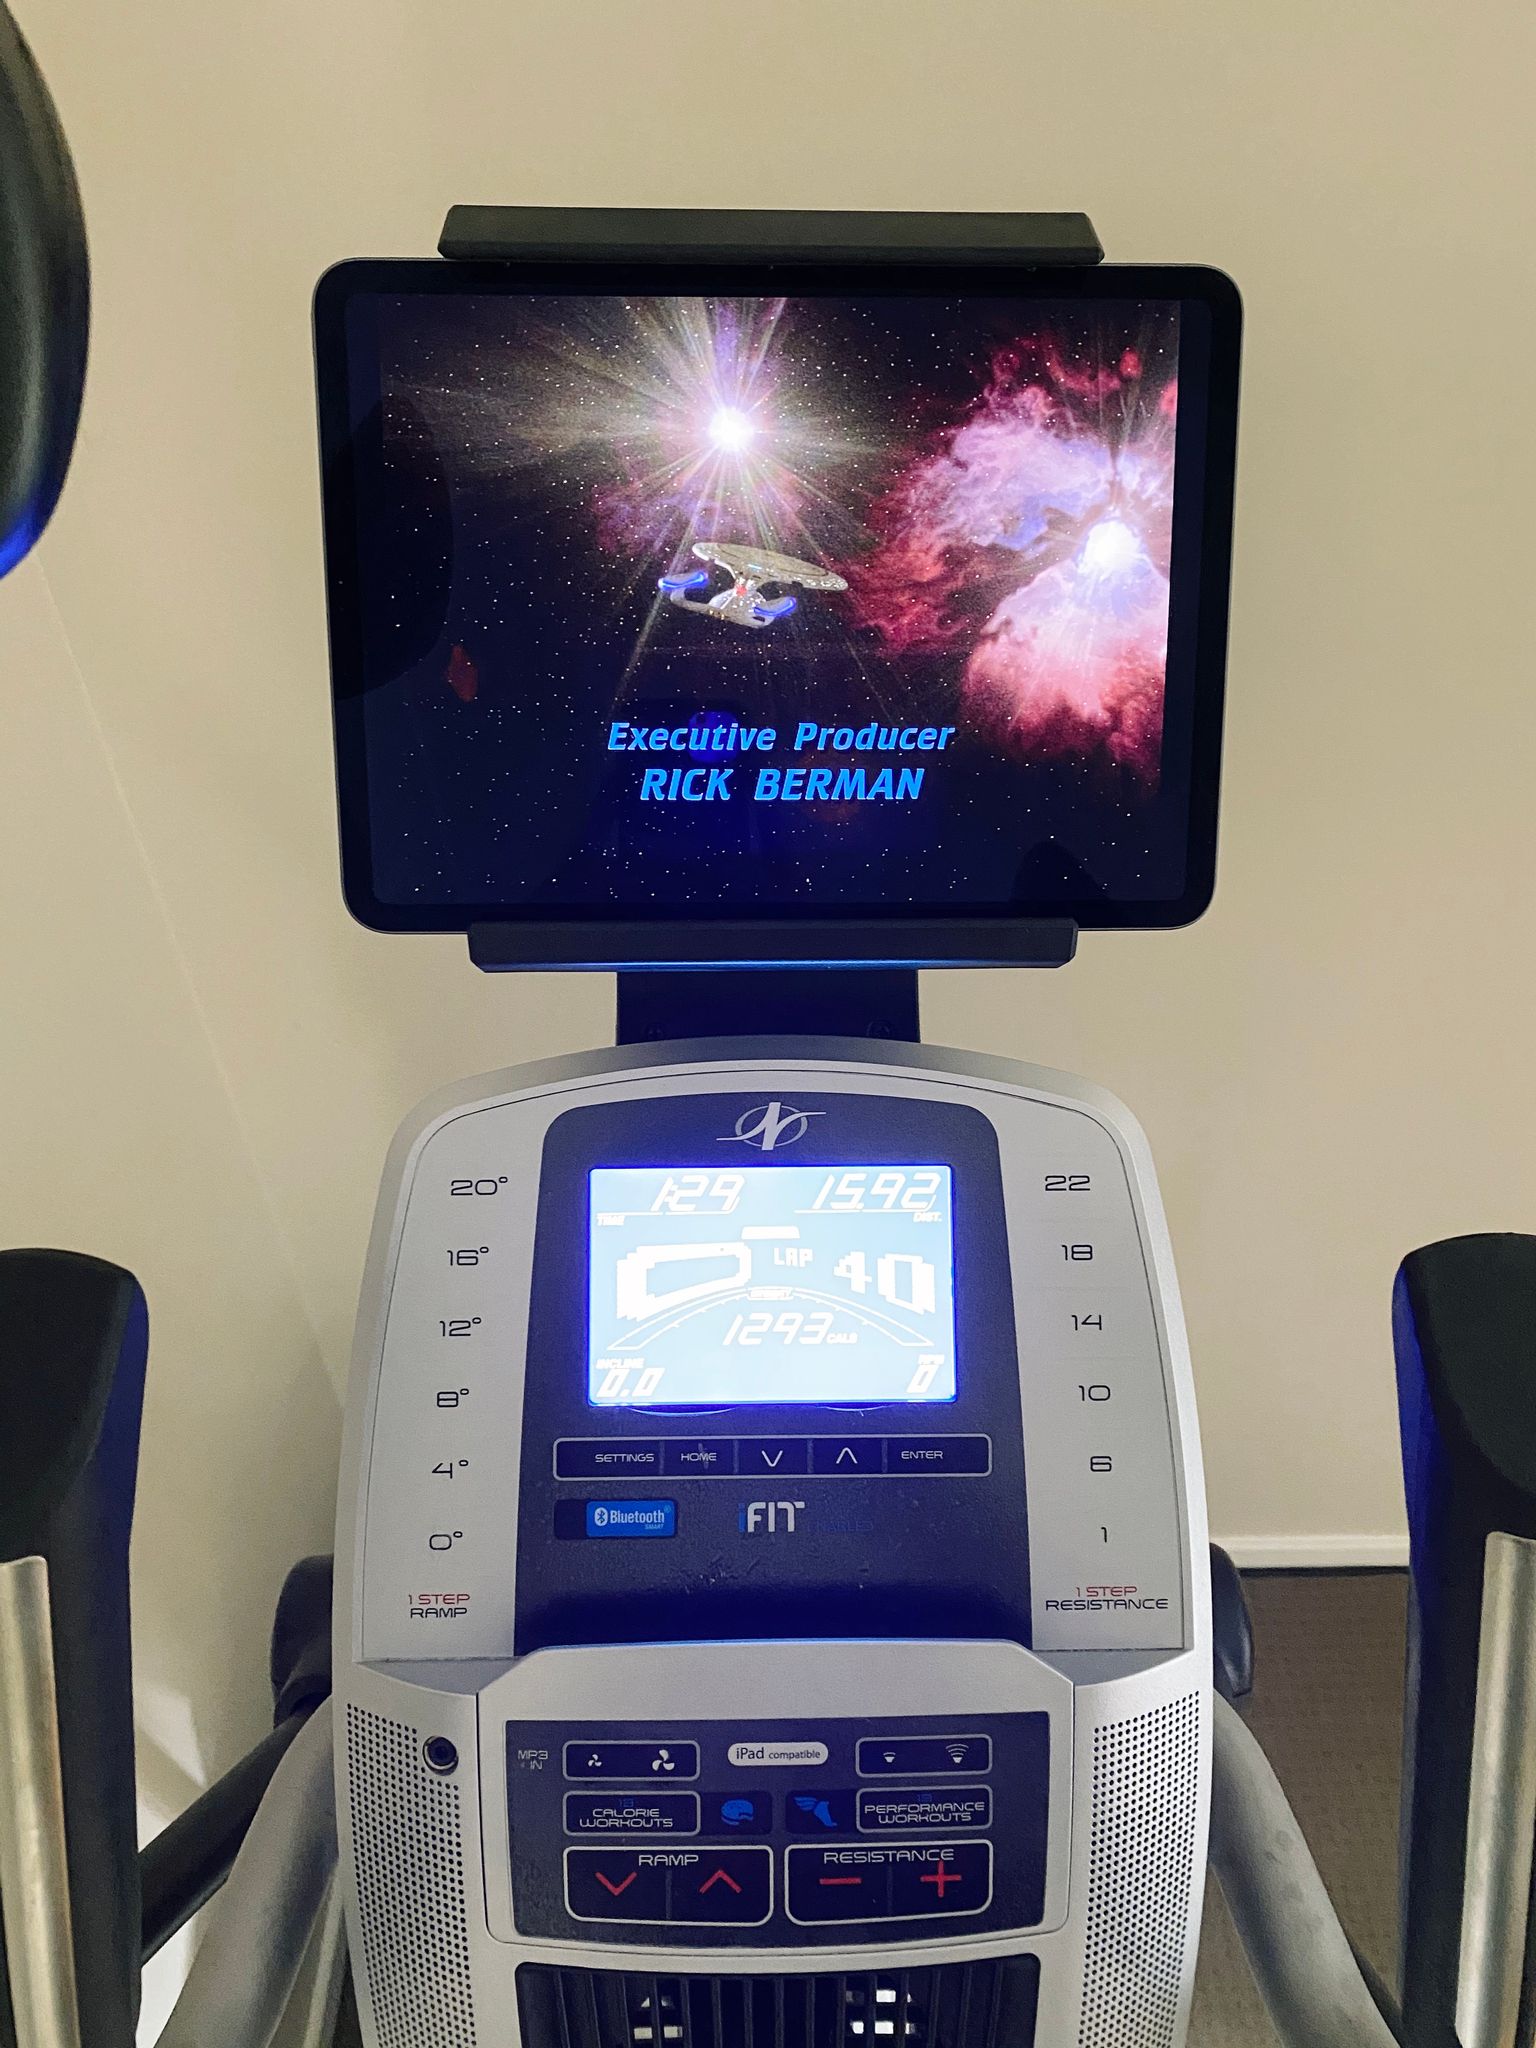 A photo of an iPad sitting on the tablet holder on the top of an elliptical machine, showing the very final closing scene of the Enterprise flying off into the stars. The elliptical display says I'd been going for an hour twenty-nine, 15.92km, and burned 1293 calories.